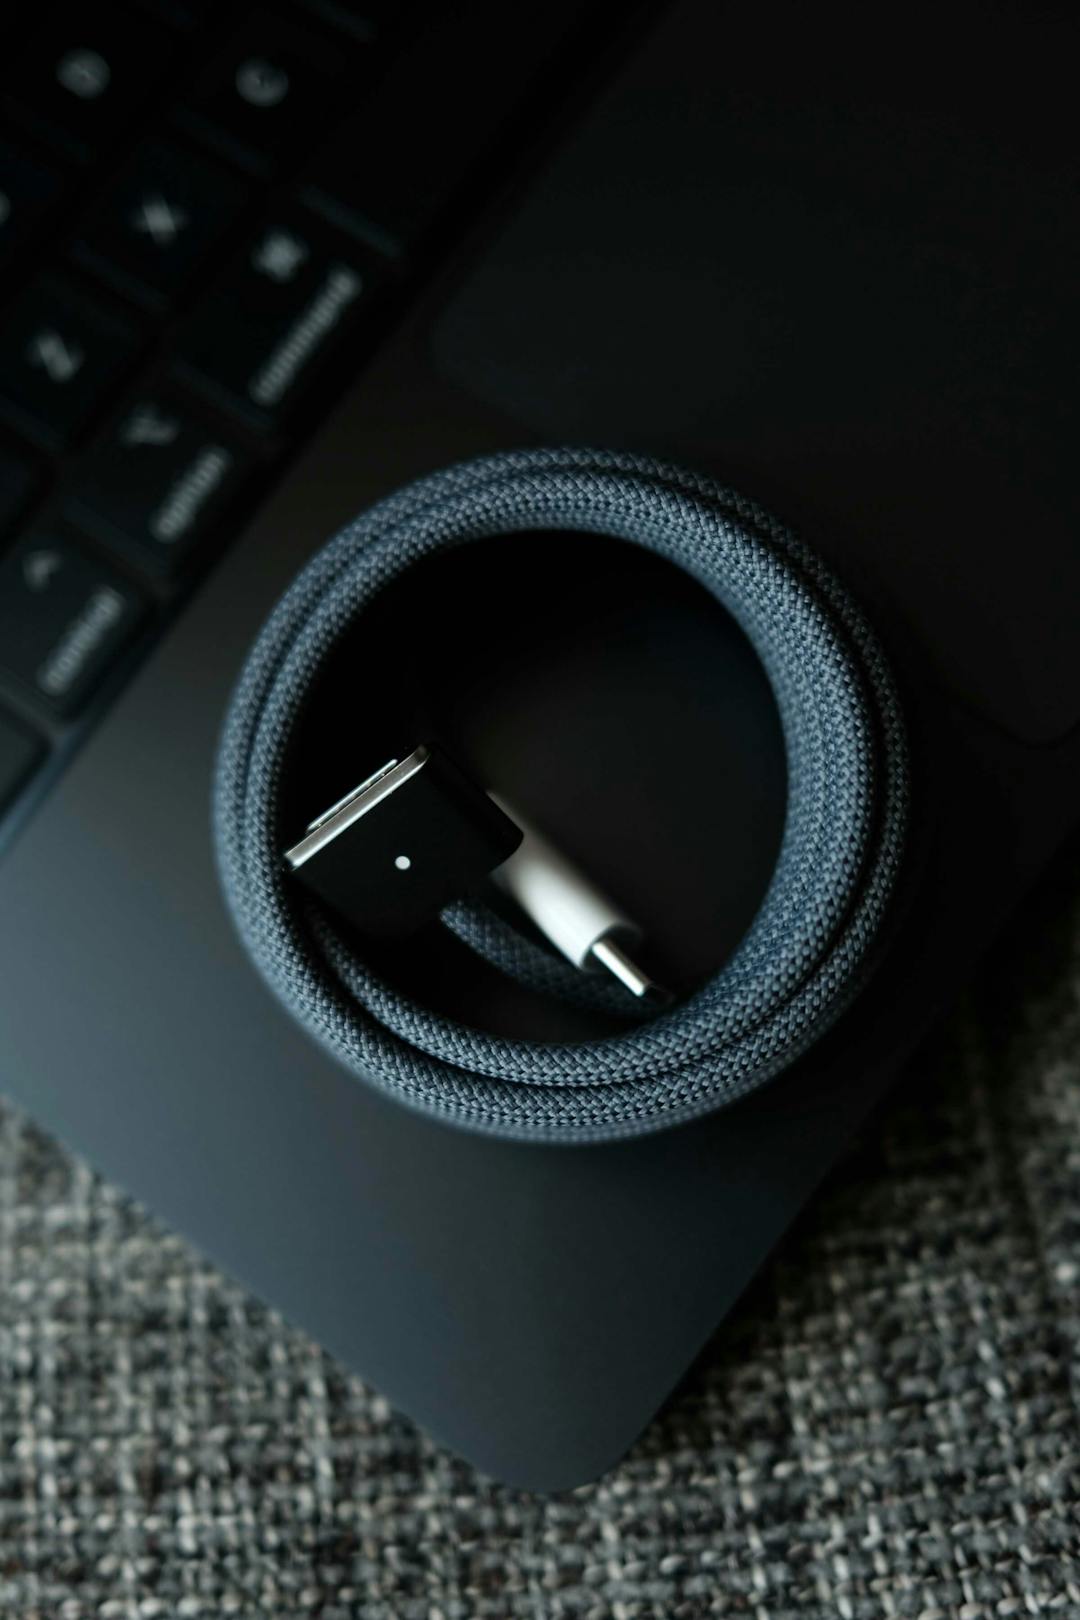 A fibre-weaved cord, wrapped into a circle on top of a laptop keyboard